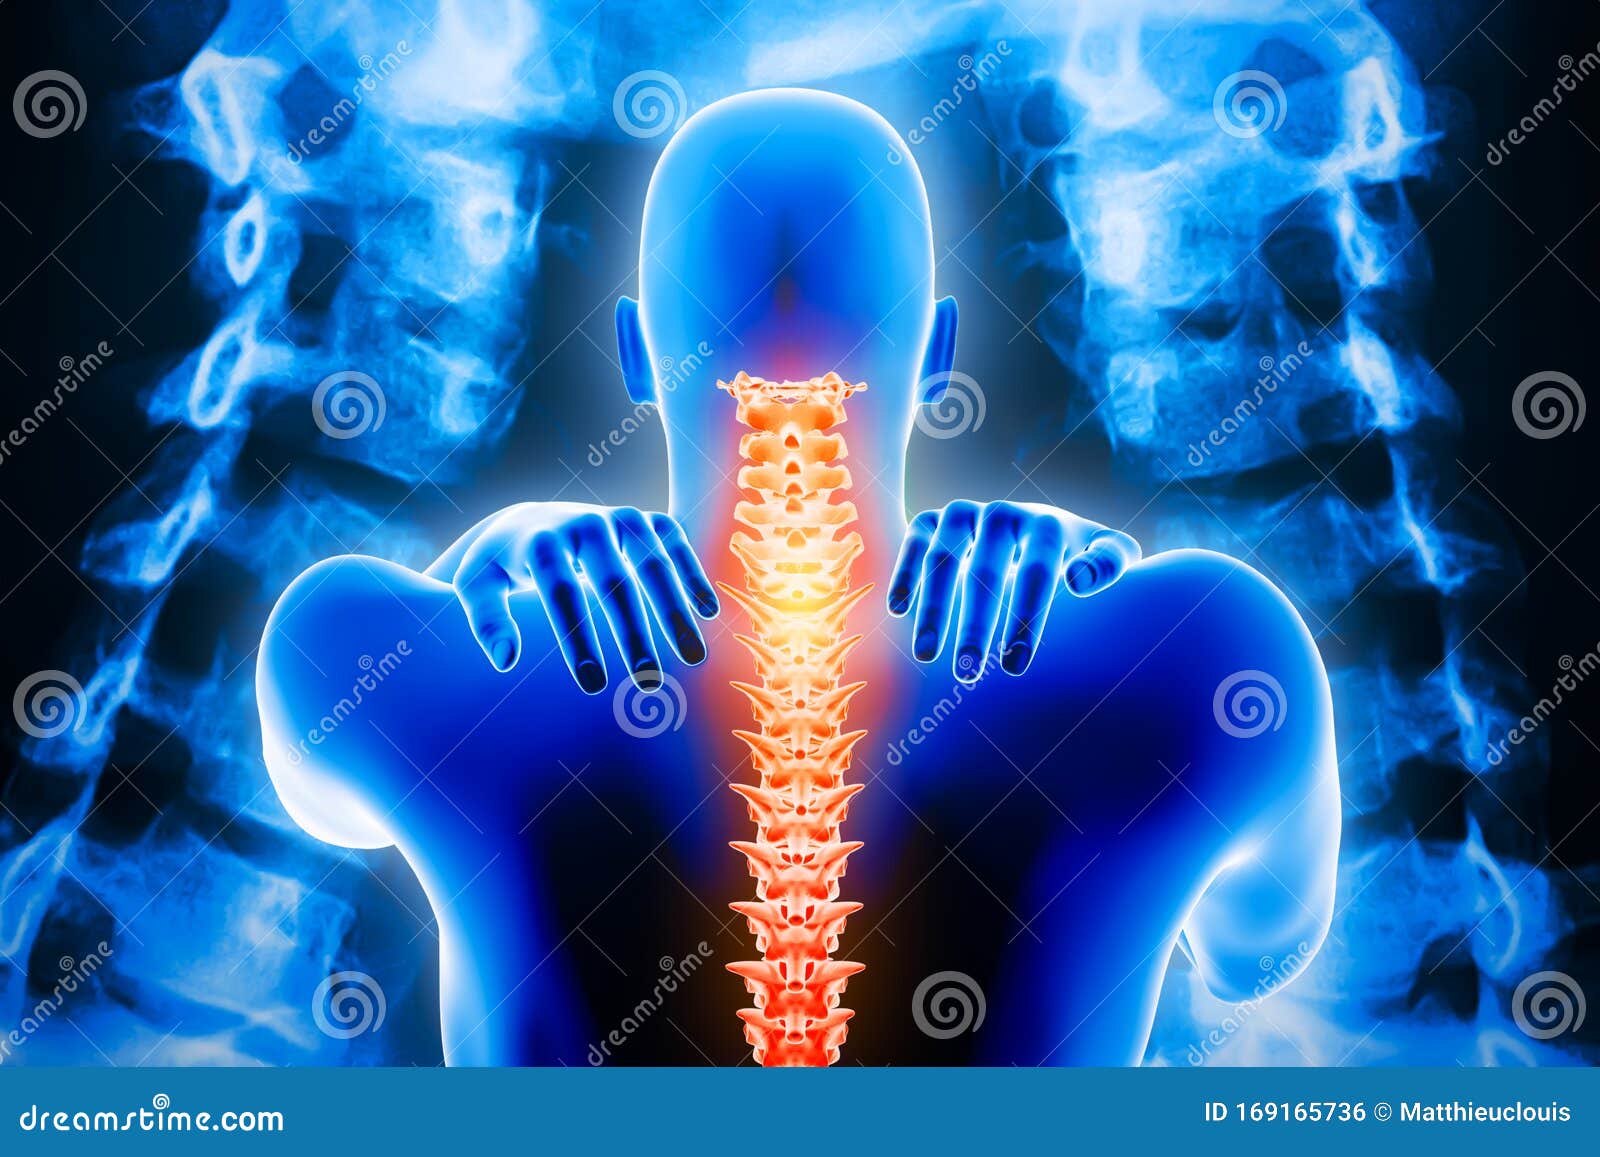 man back body with spine and x-ray vertebrae imagery in the background. neck pain or cervicalgia, backbone or cervical injury 3d